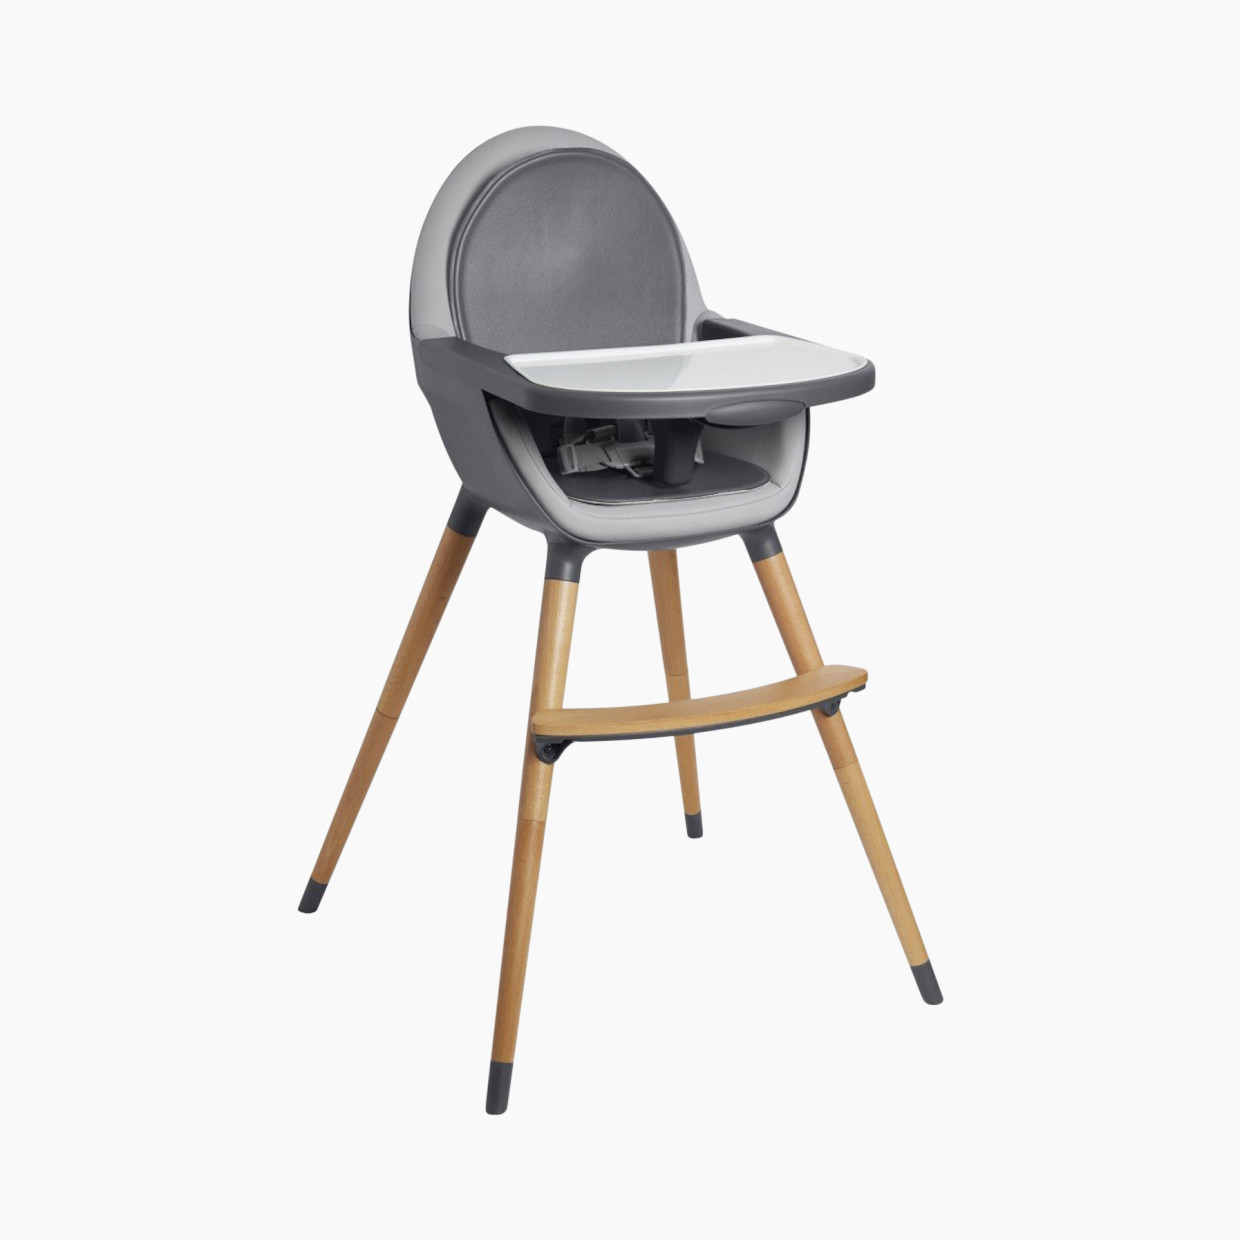 Skip Hop Tuo Convertible High Chair - Charcoal Grey.